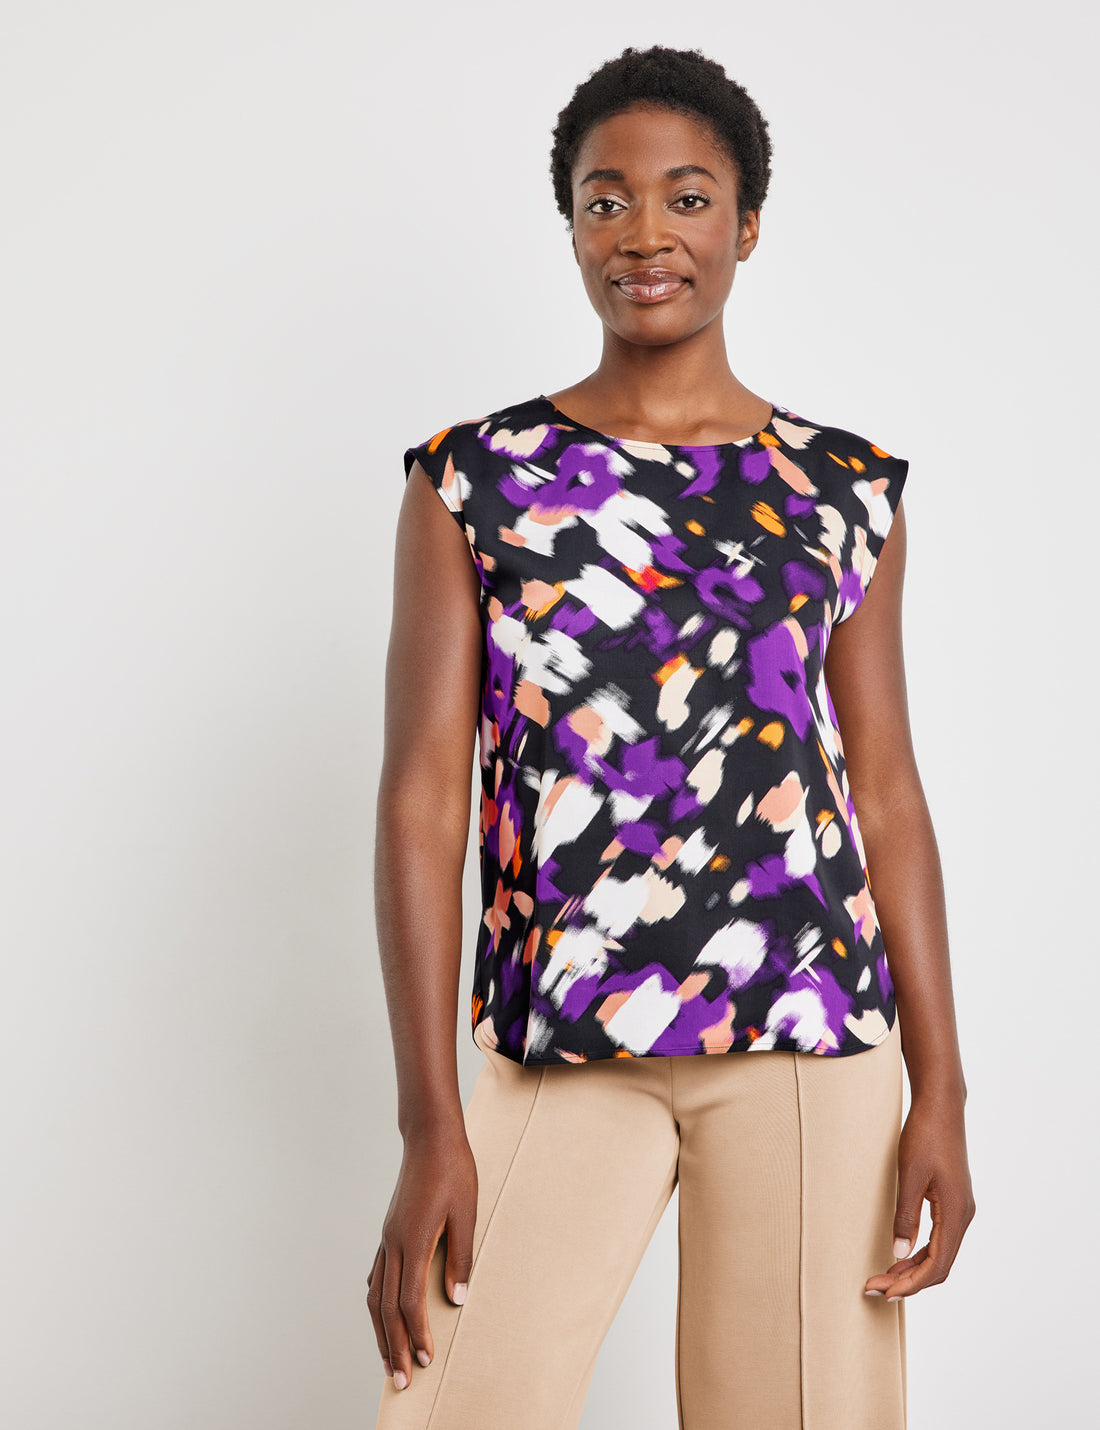 Patterned Blouse Top With A Small Slit At The Back_01